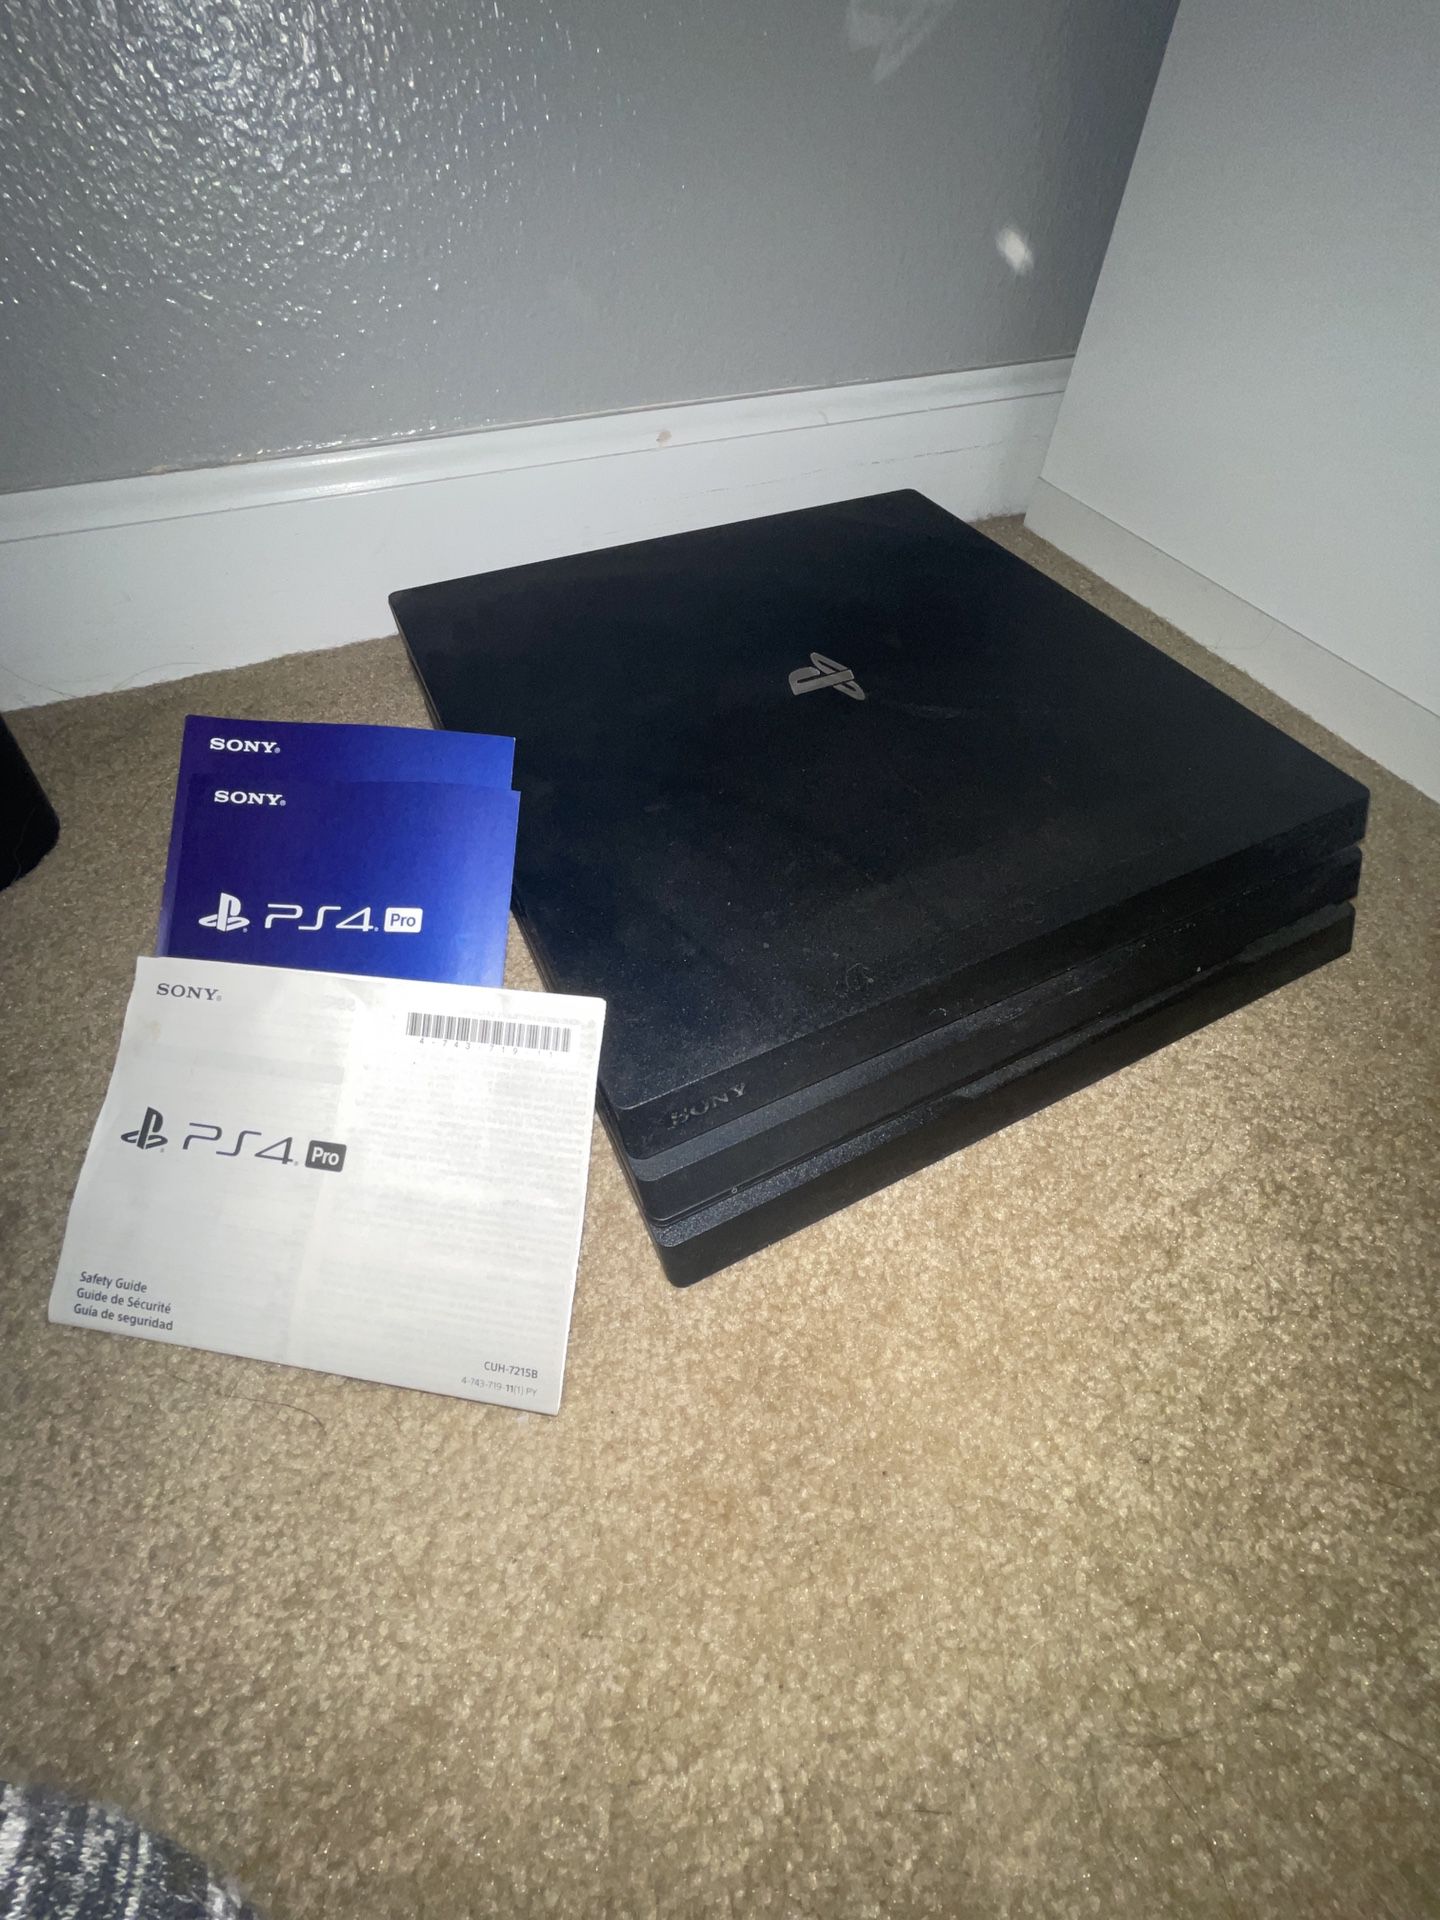 Ps4 Pro Including Spider Man Game, remote, and camera